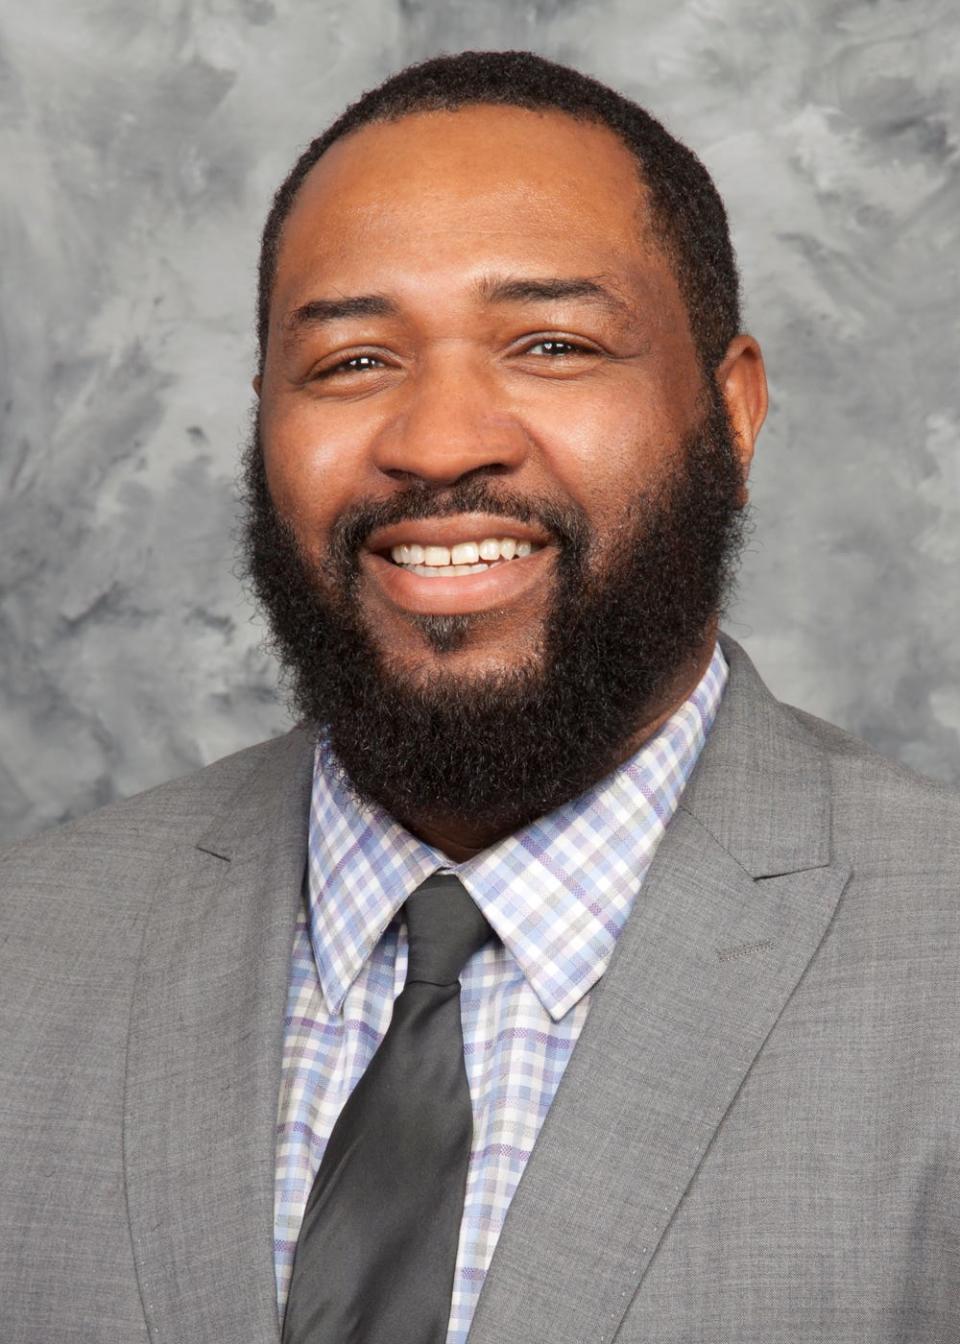 Demetrius Starling oversees Michigan's child welfare program, which includes post-adoption support services for those who adopted out of foster care.